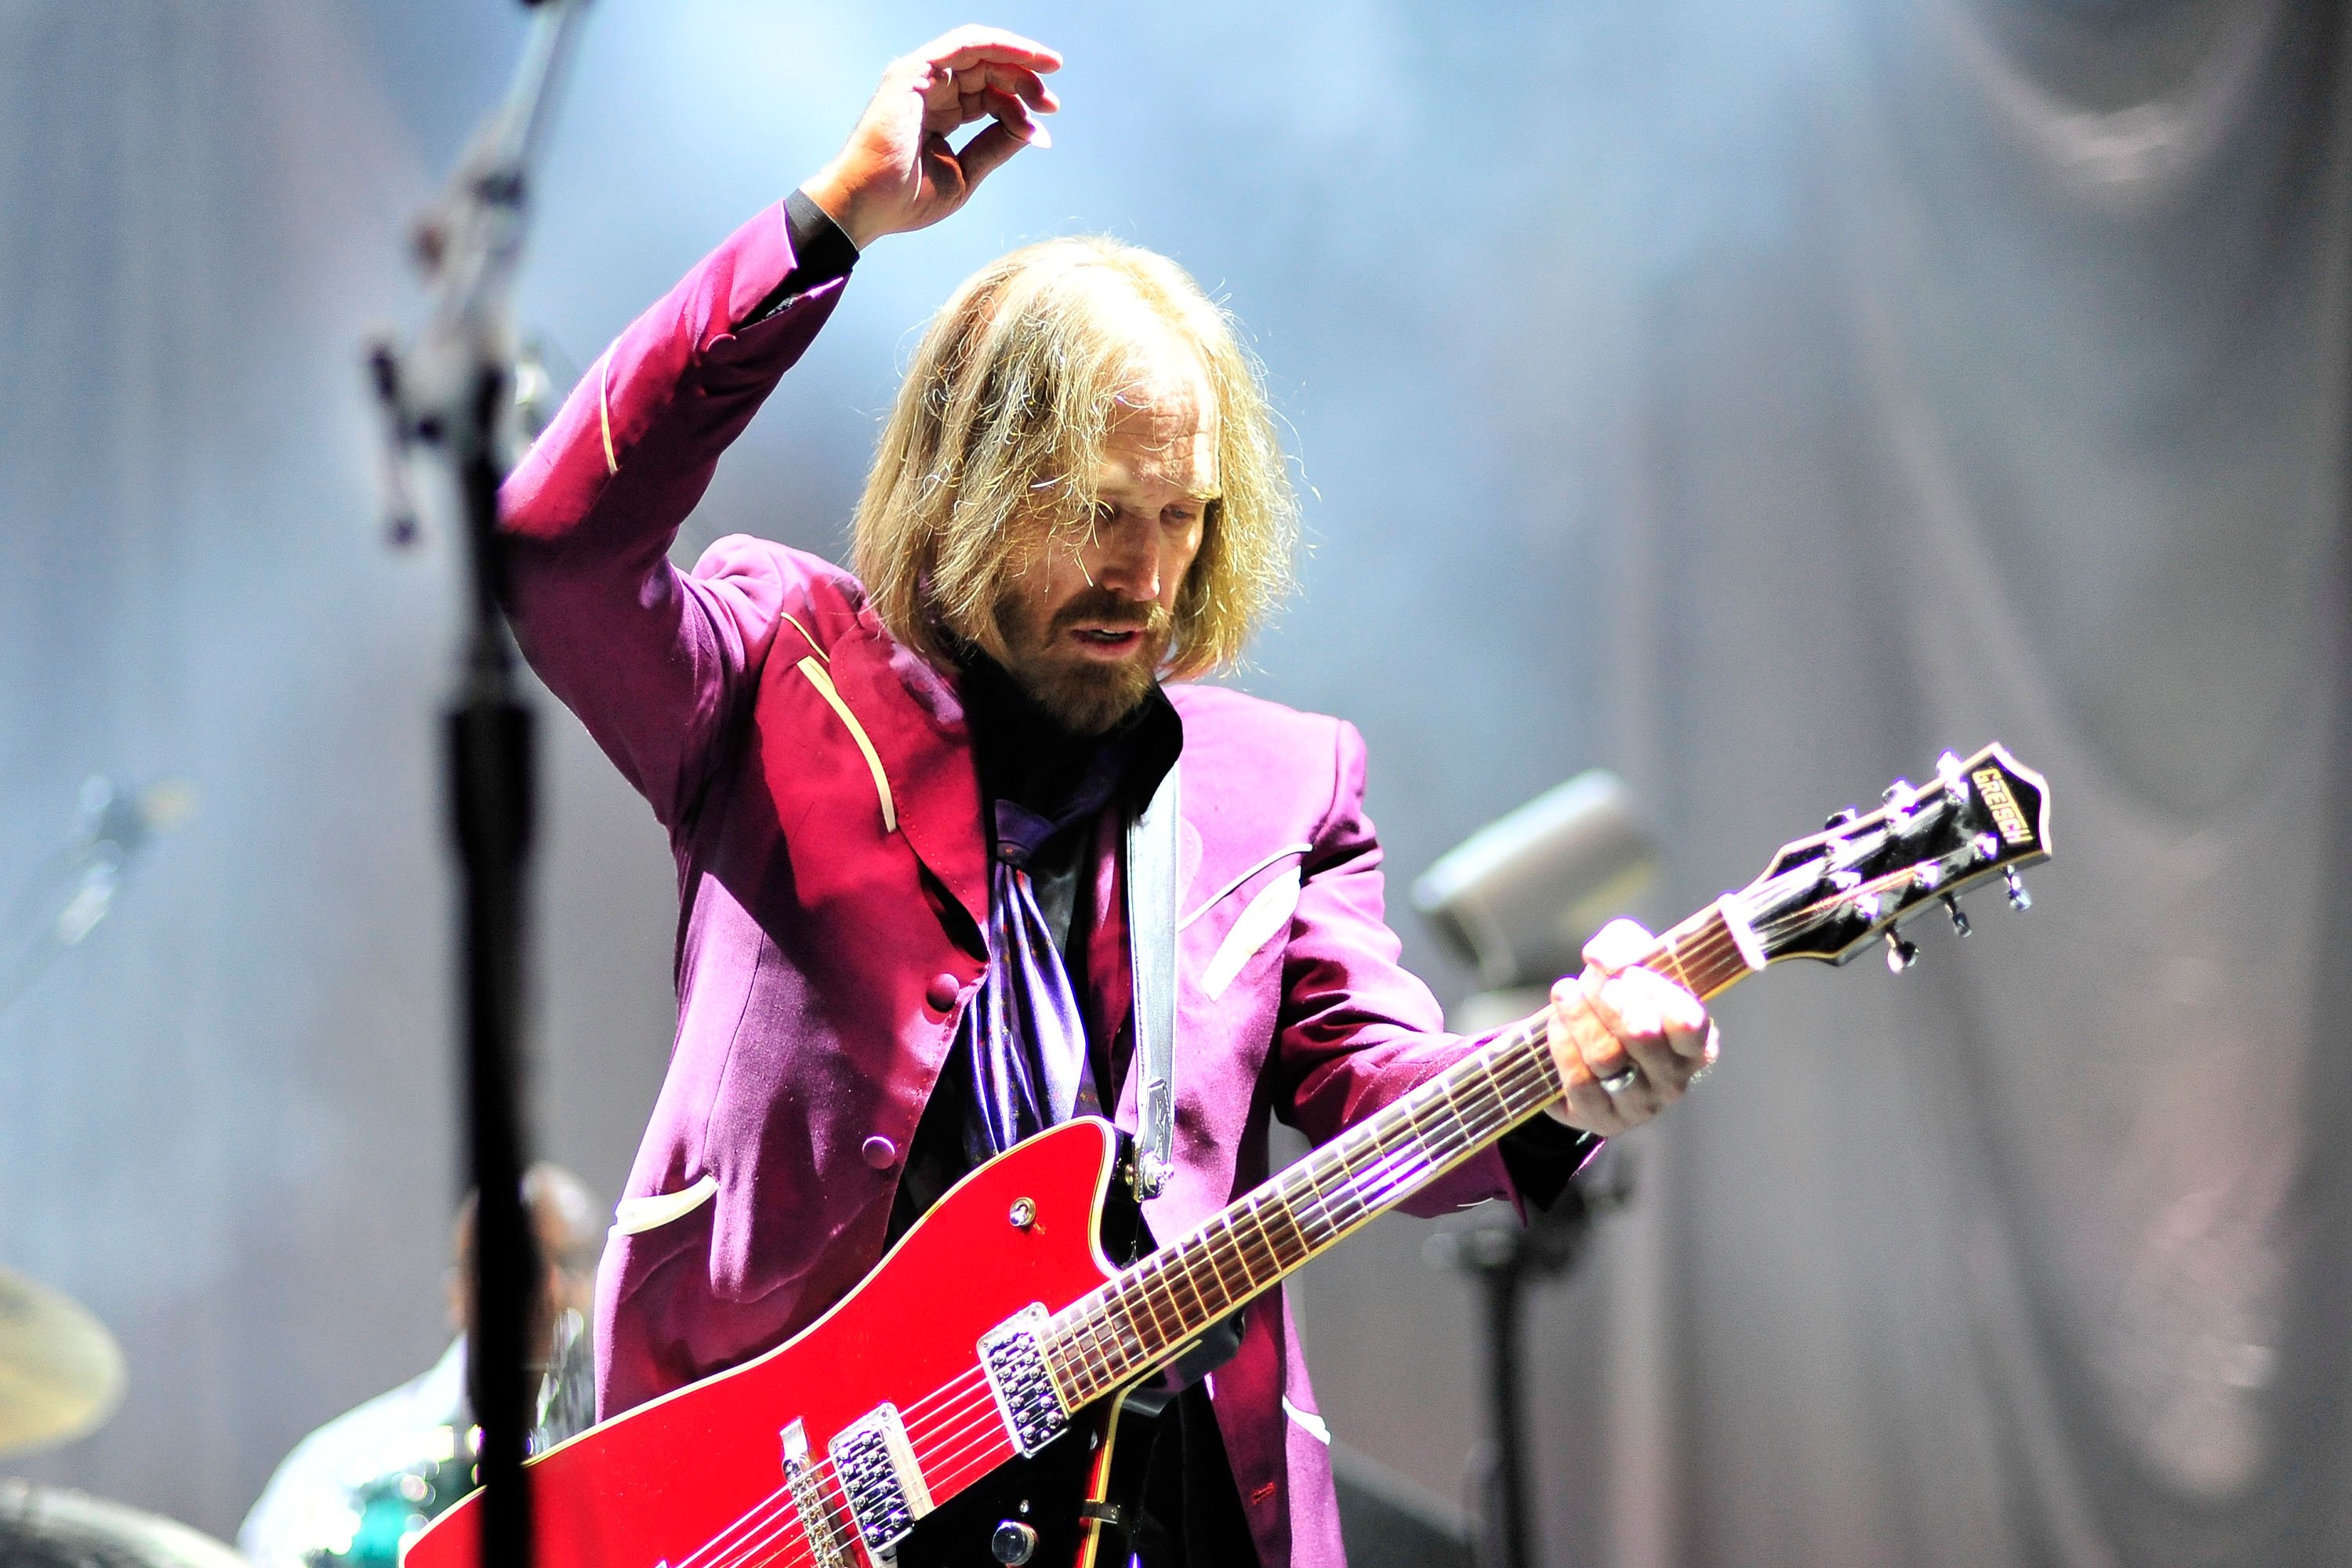 Tom Petty wears a purple jacket and holds his hand in the air while playing guitar.